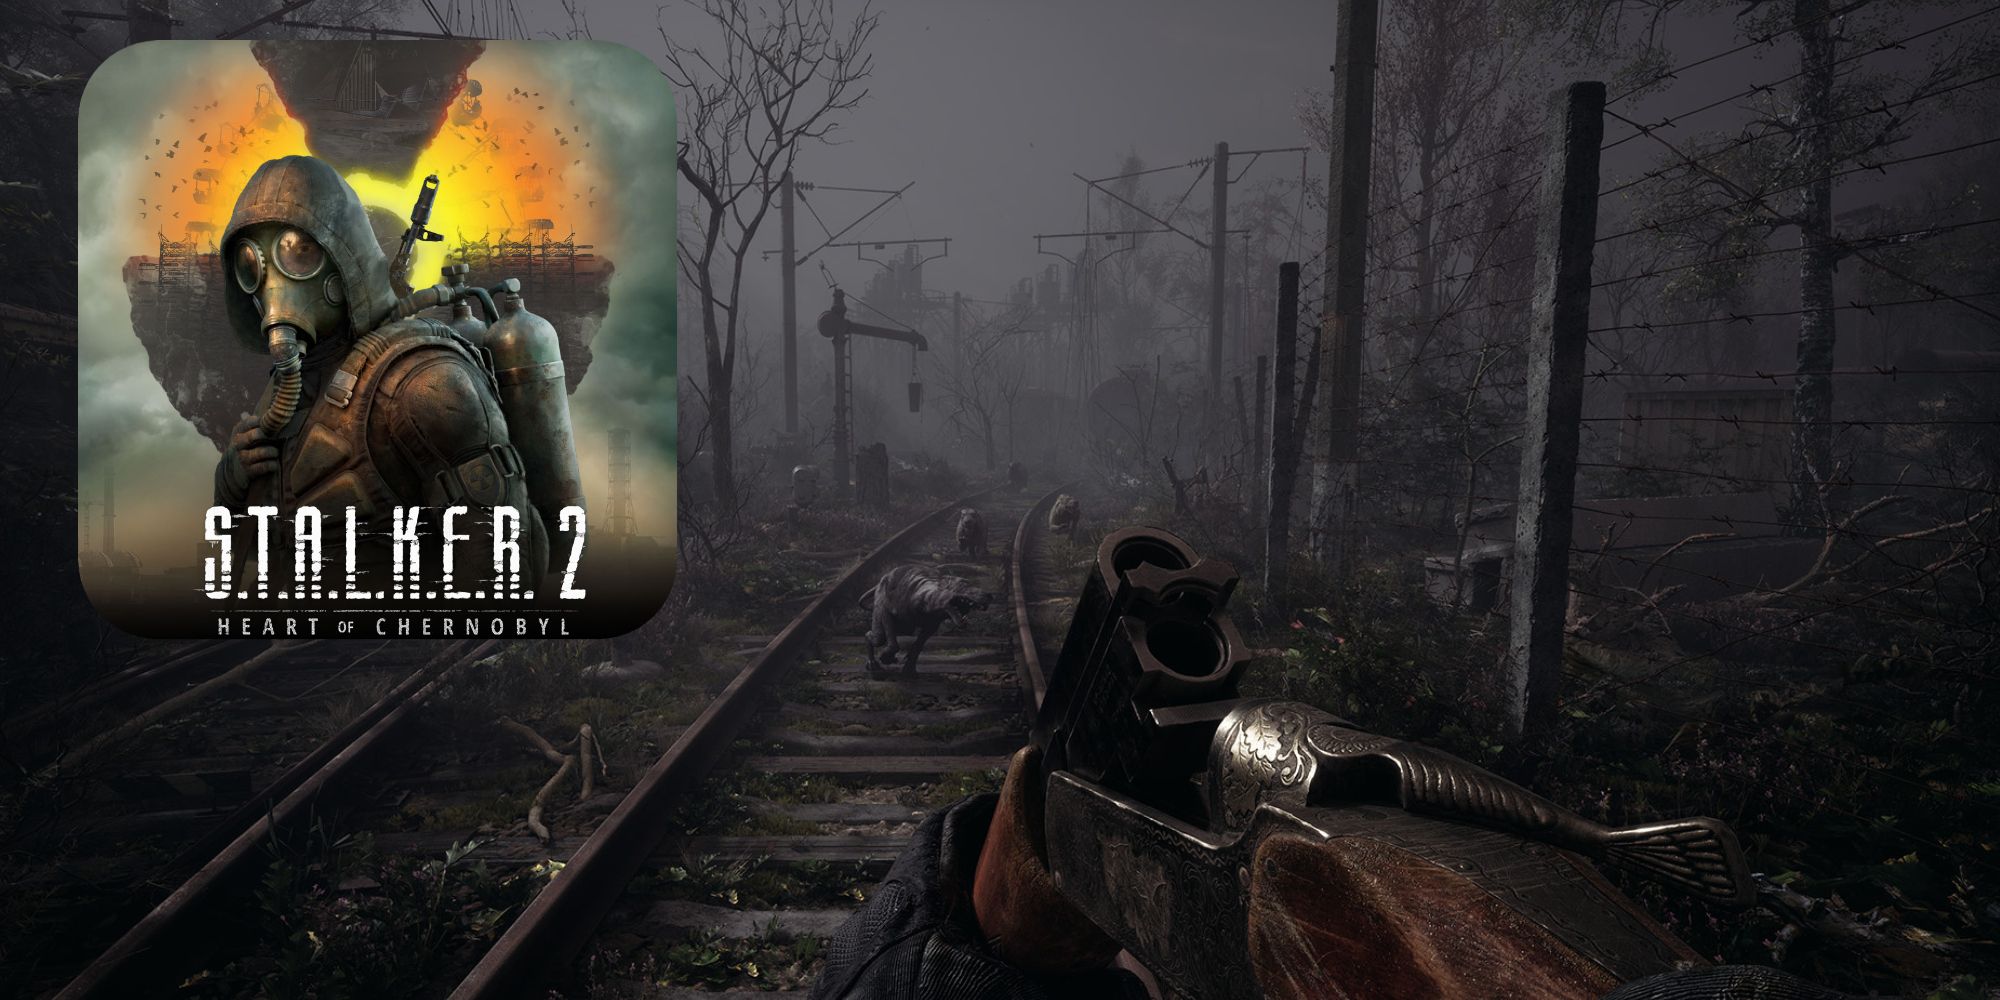 Screen captures from STALKER 2. A first person perspective shows a broken rife in the hands of the player. Wolves run on railroad tracks ahead.